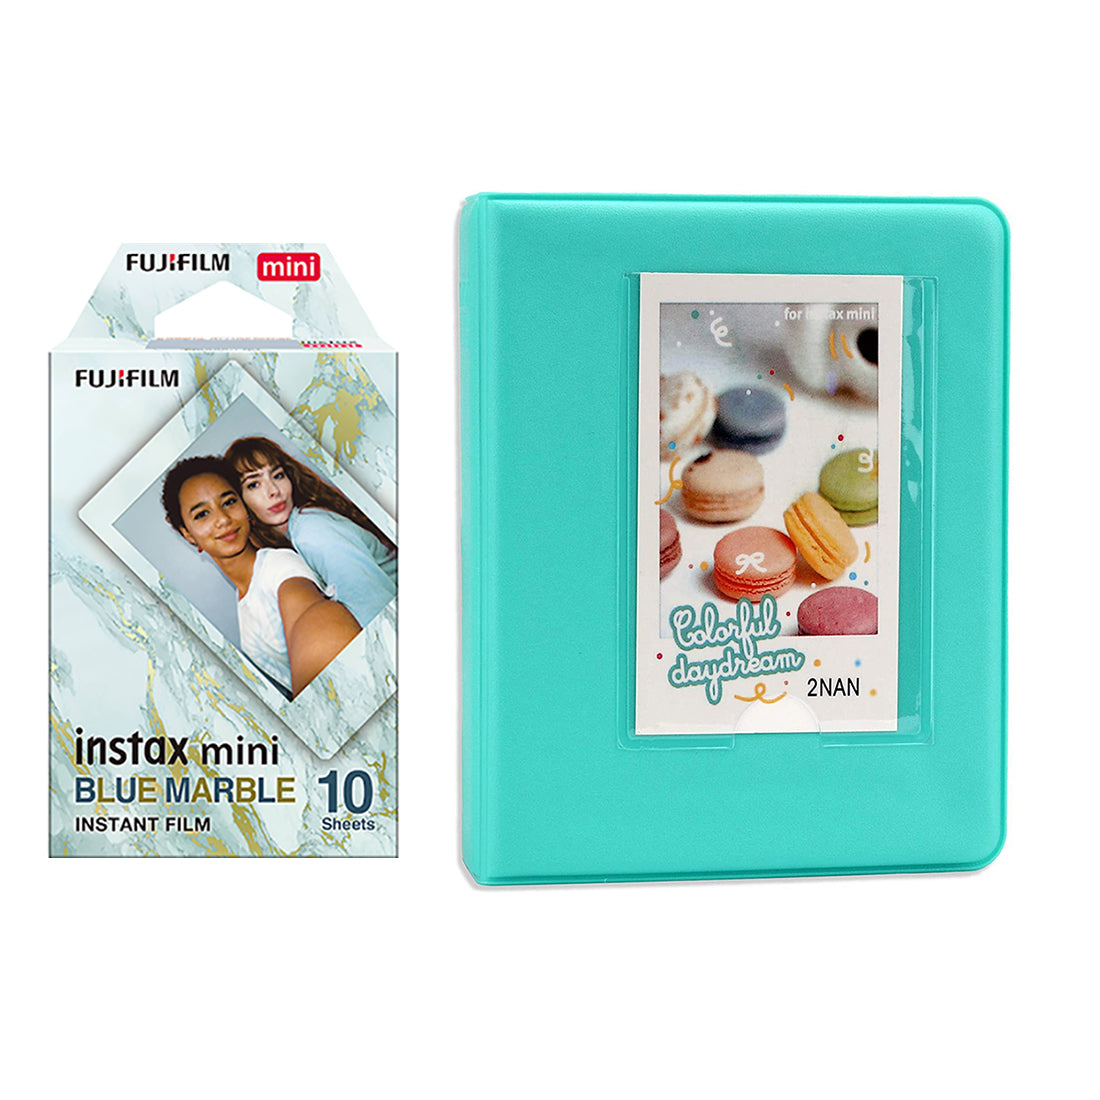 Fujifilm Instax Mini 10X1 blue marble Instant Film with Instax Time Photo Album 64 Sheets Mint Green